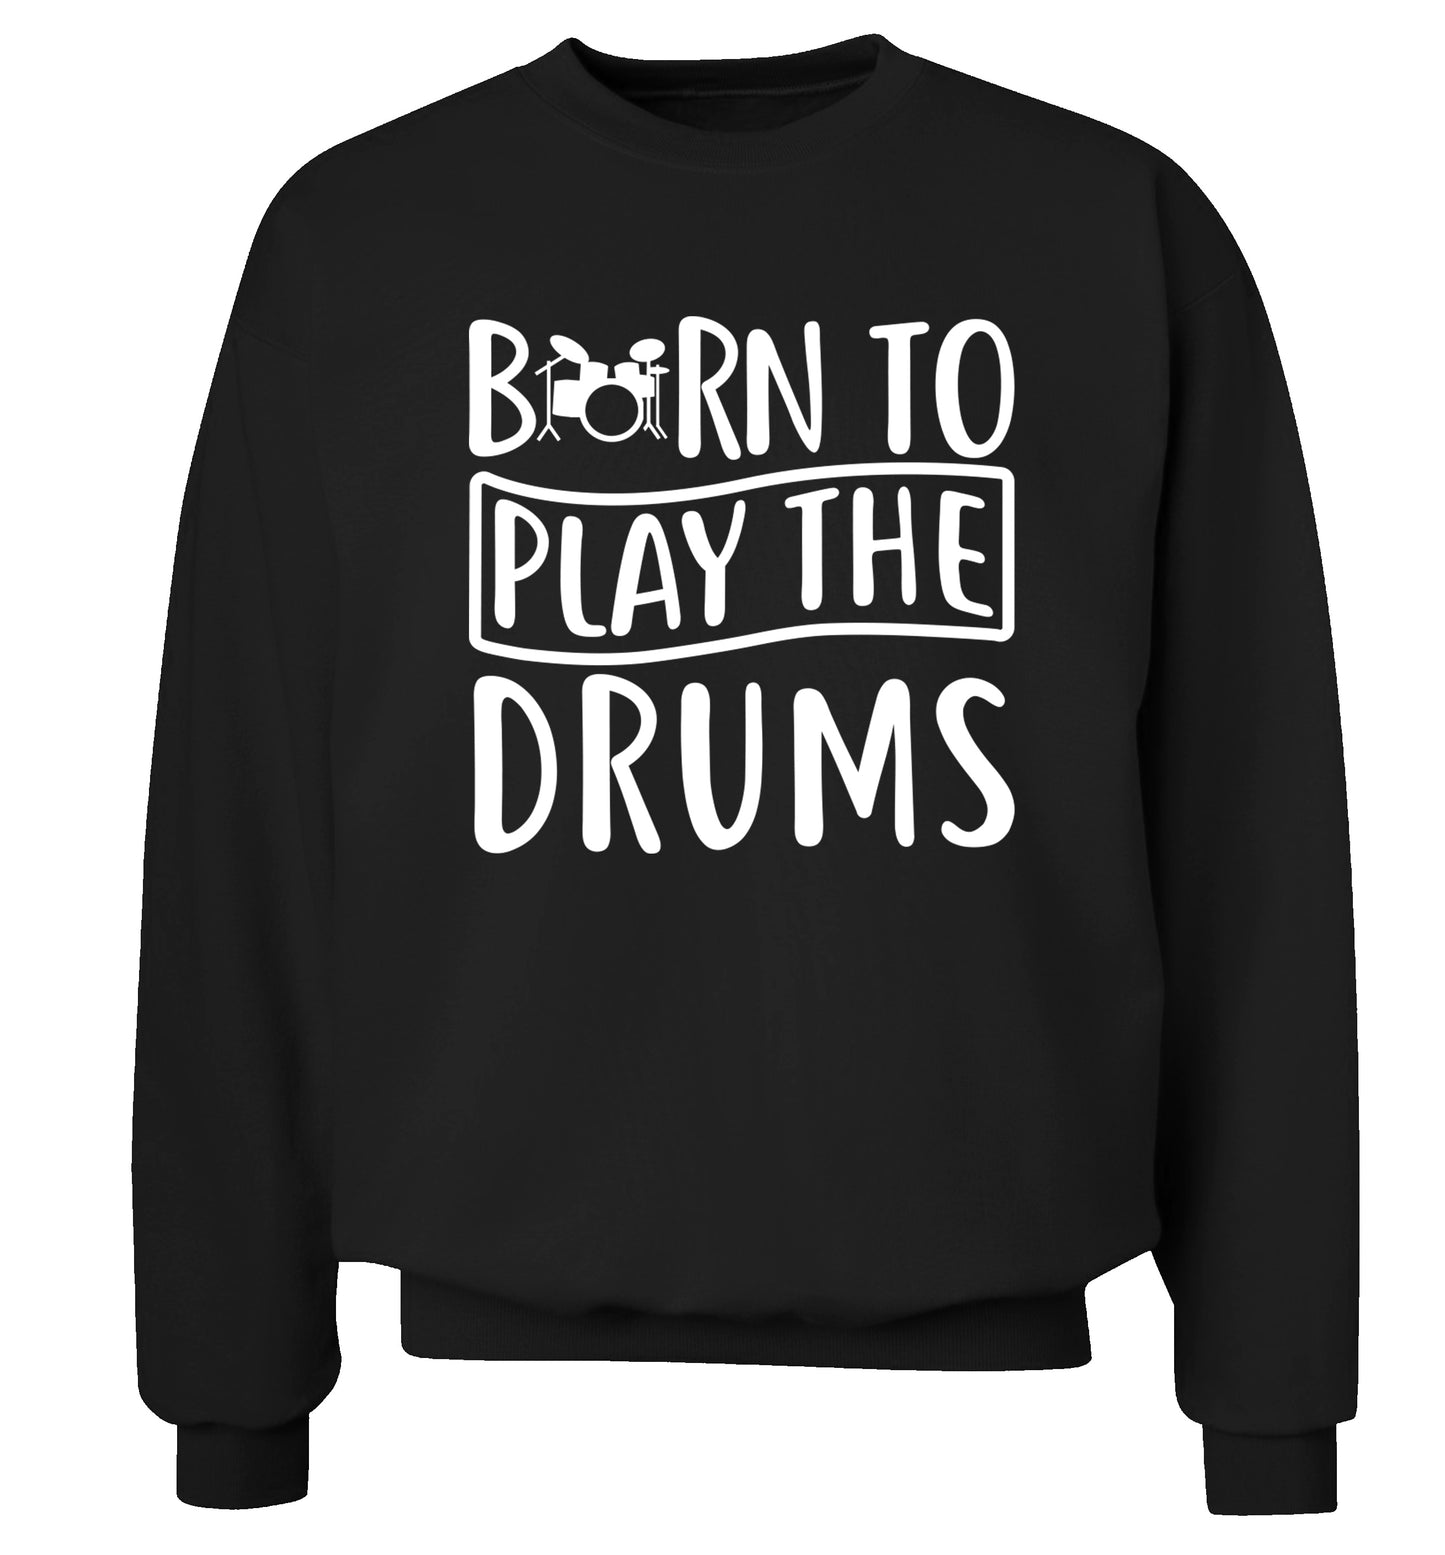 Born to play the drums Adult's unisex black Sweater 2XL